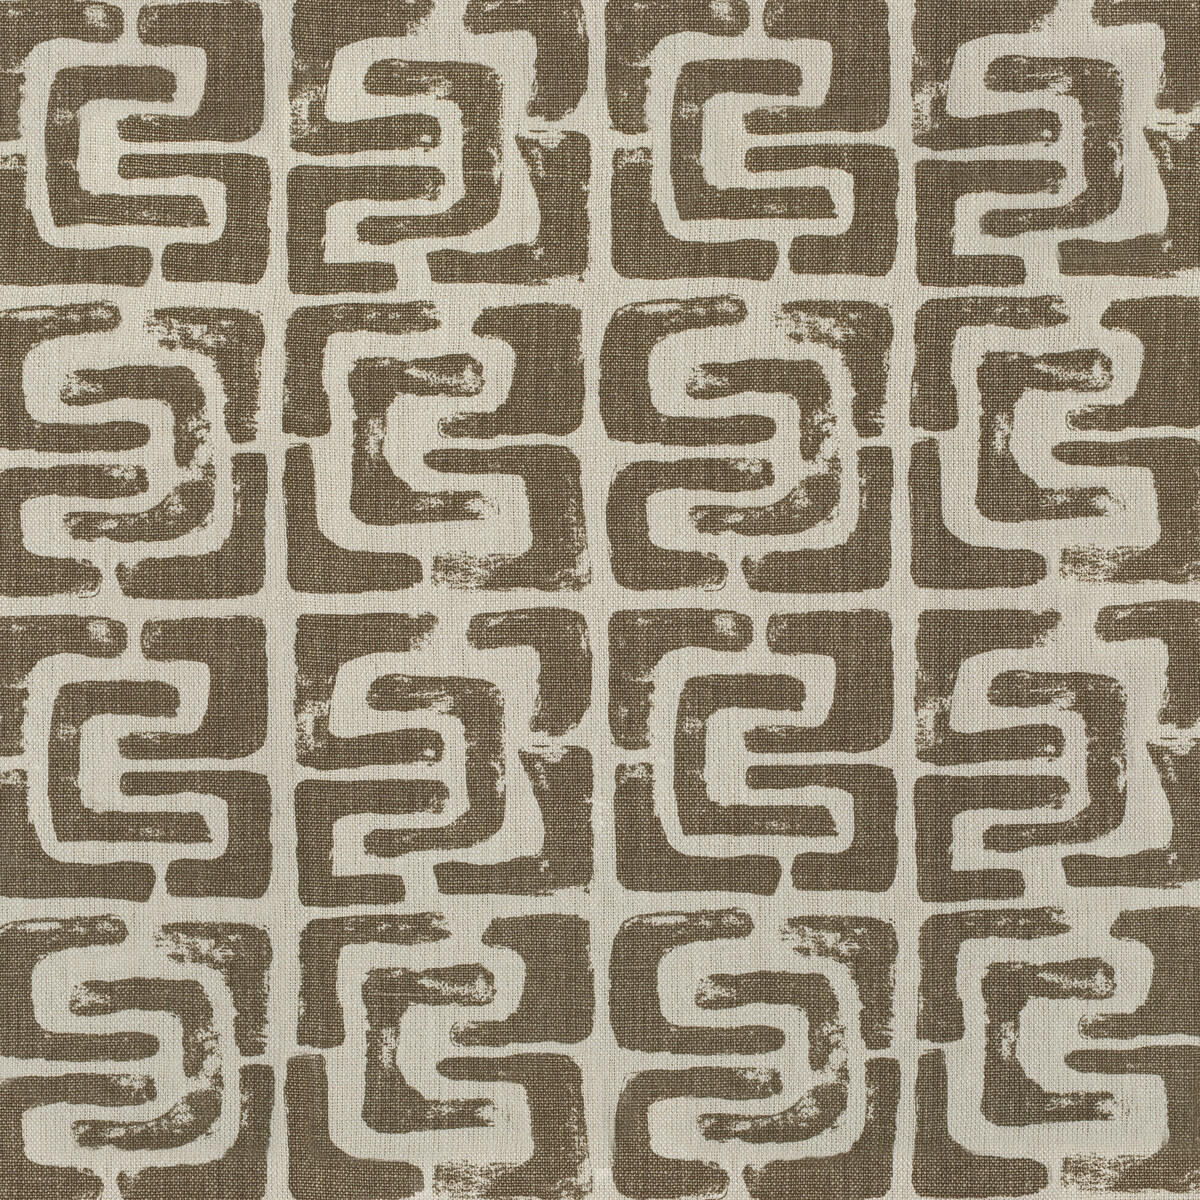 Kravet Couture Oui Bloc.6.0 Oui Bloc Multipurpose Fabric in Canyon/White/Taupe